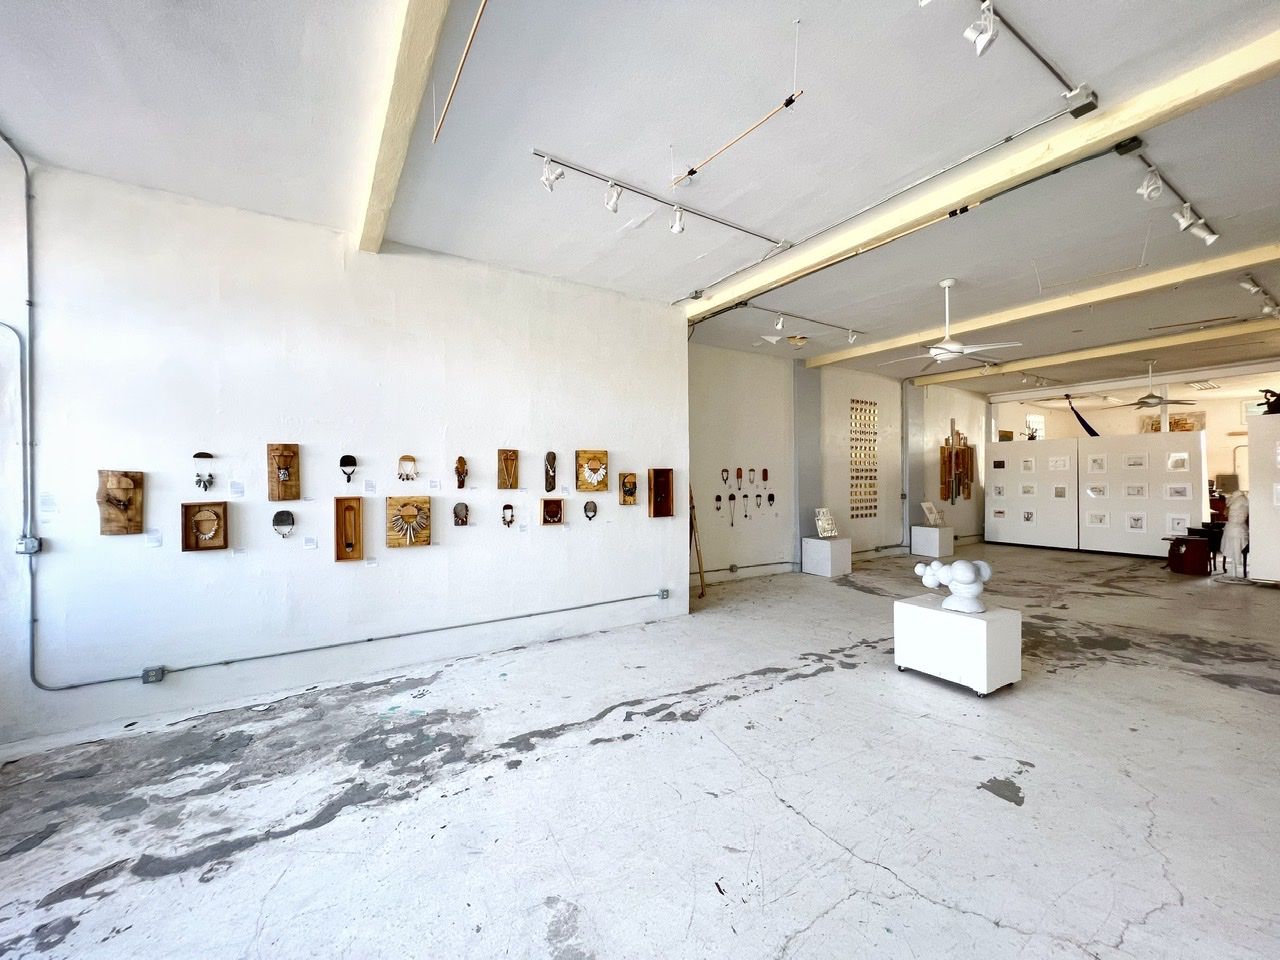 the interior view of a gallery with a marble sculpture of a molecule on the floor and art on the white walls